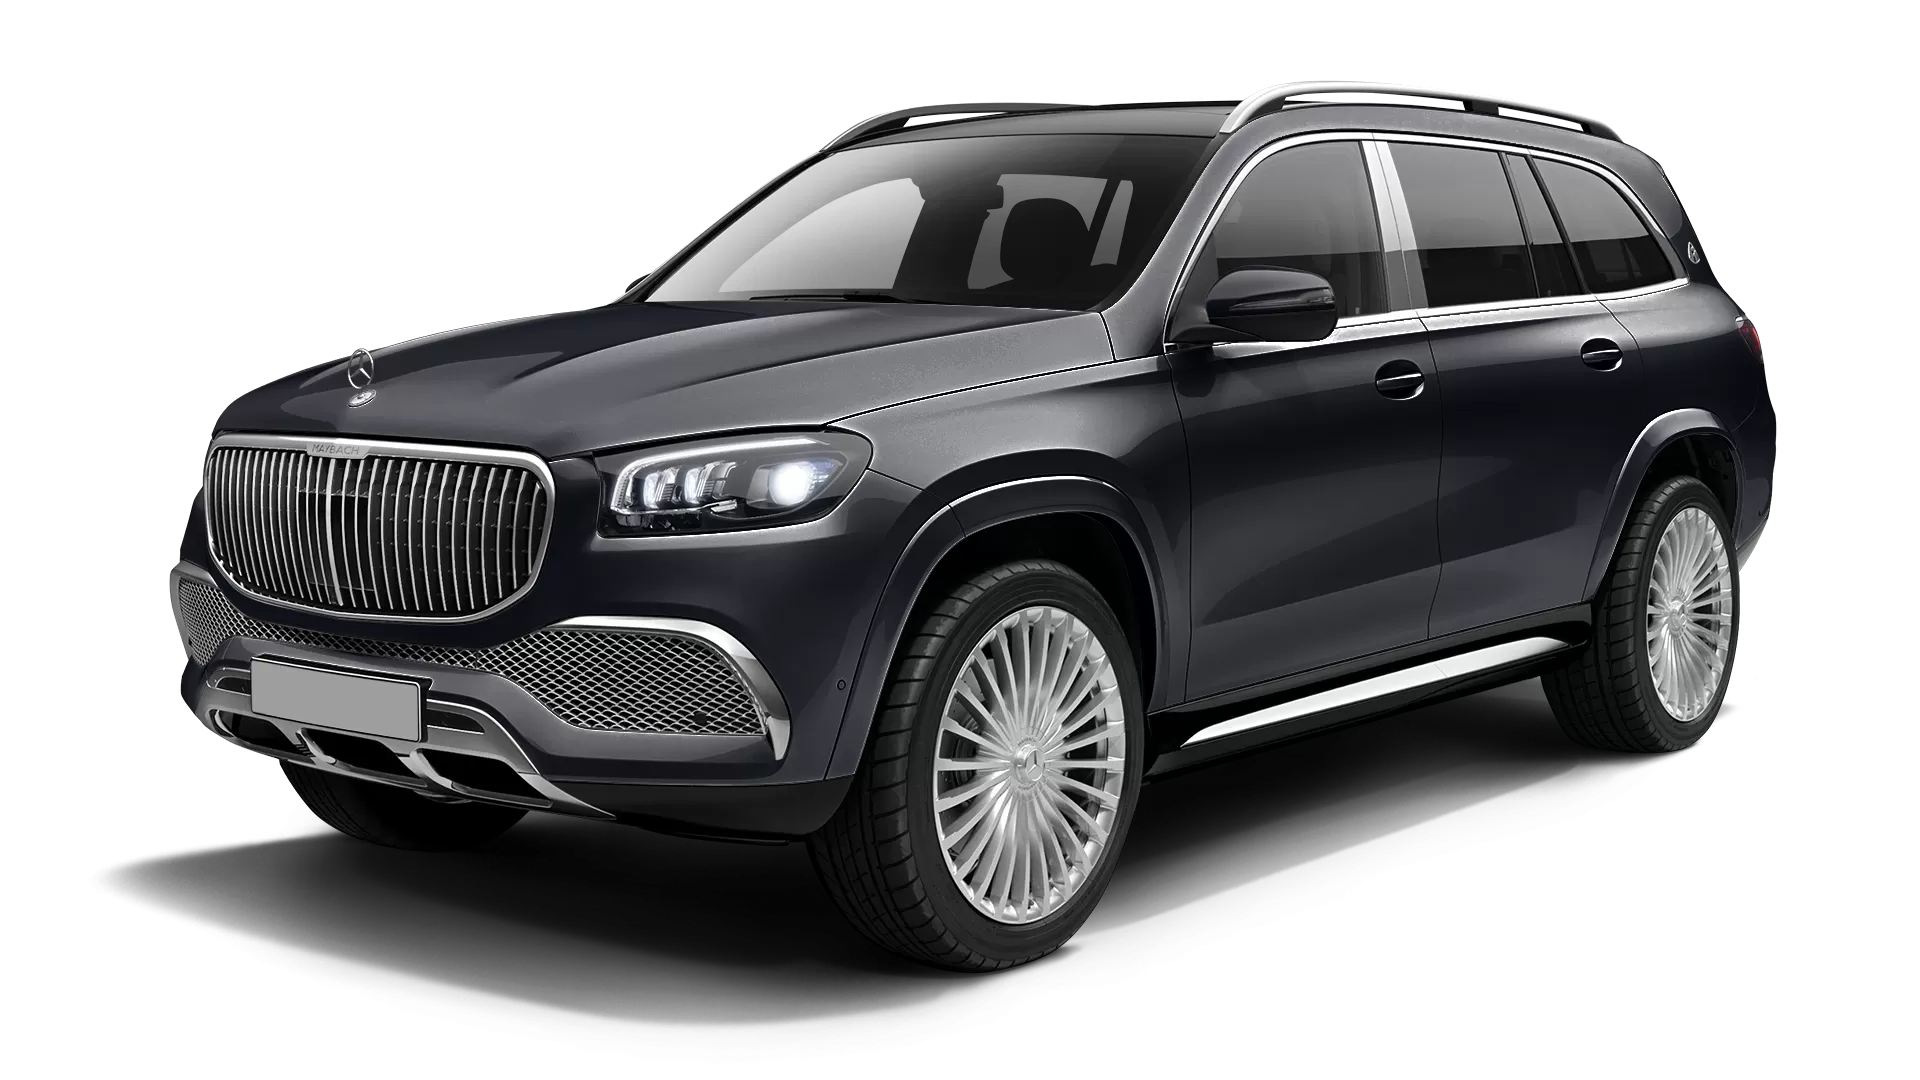 Mercedes Maybach GLS 600 stock front view in Obsidian Black color